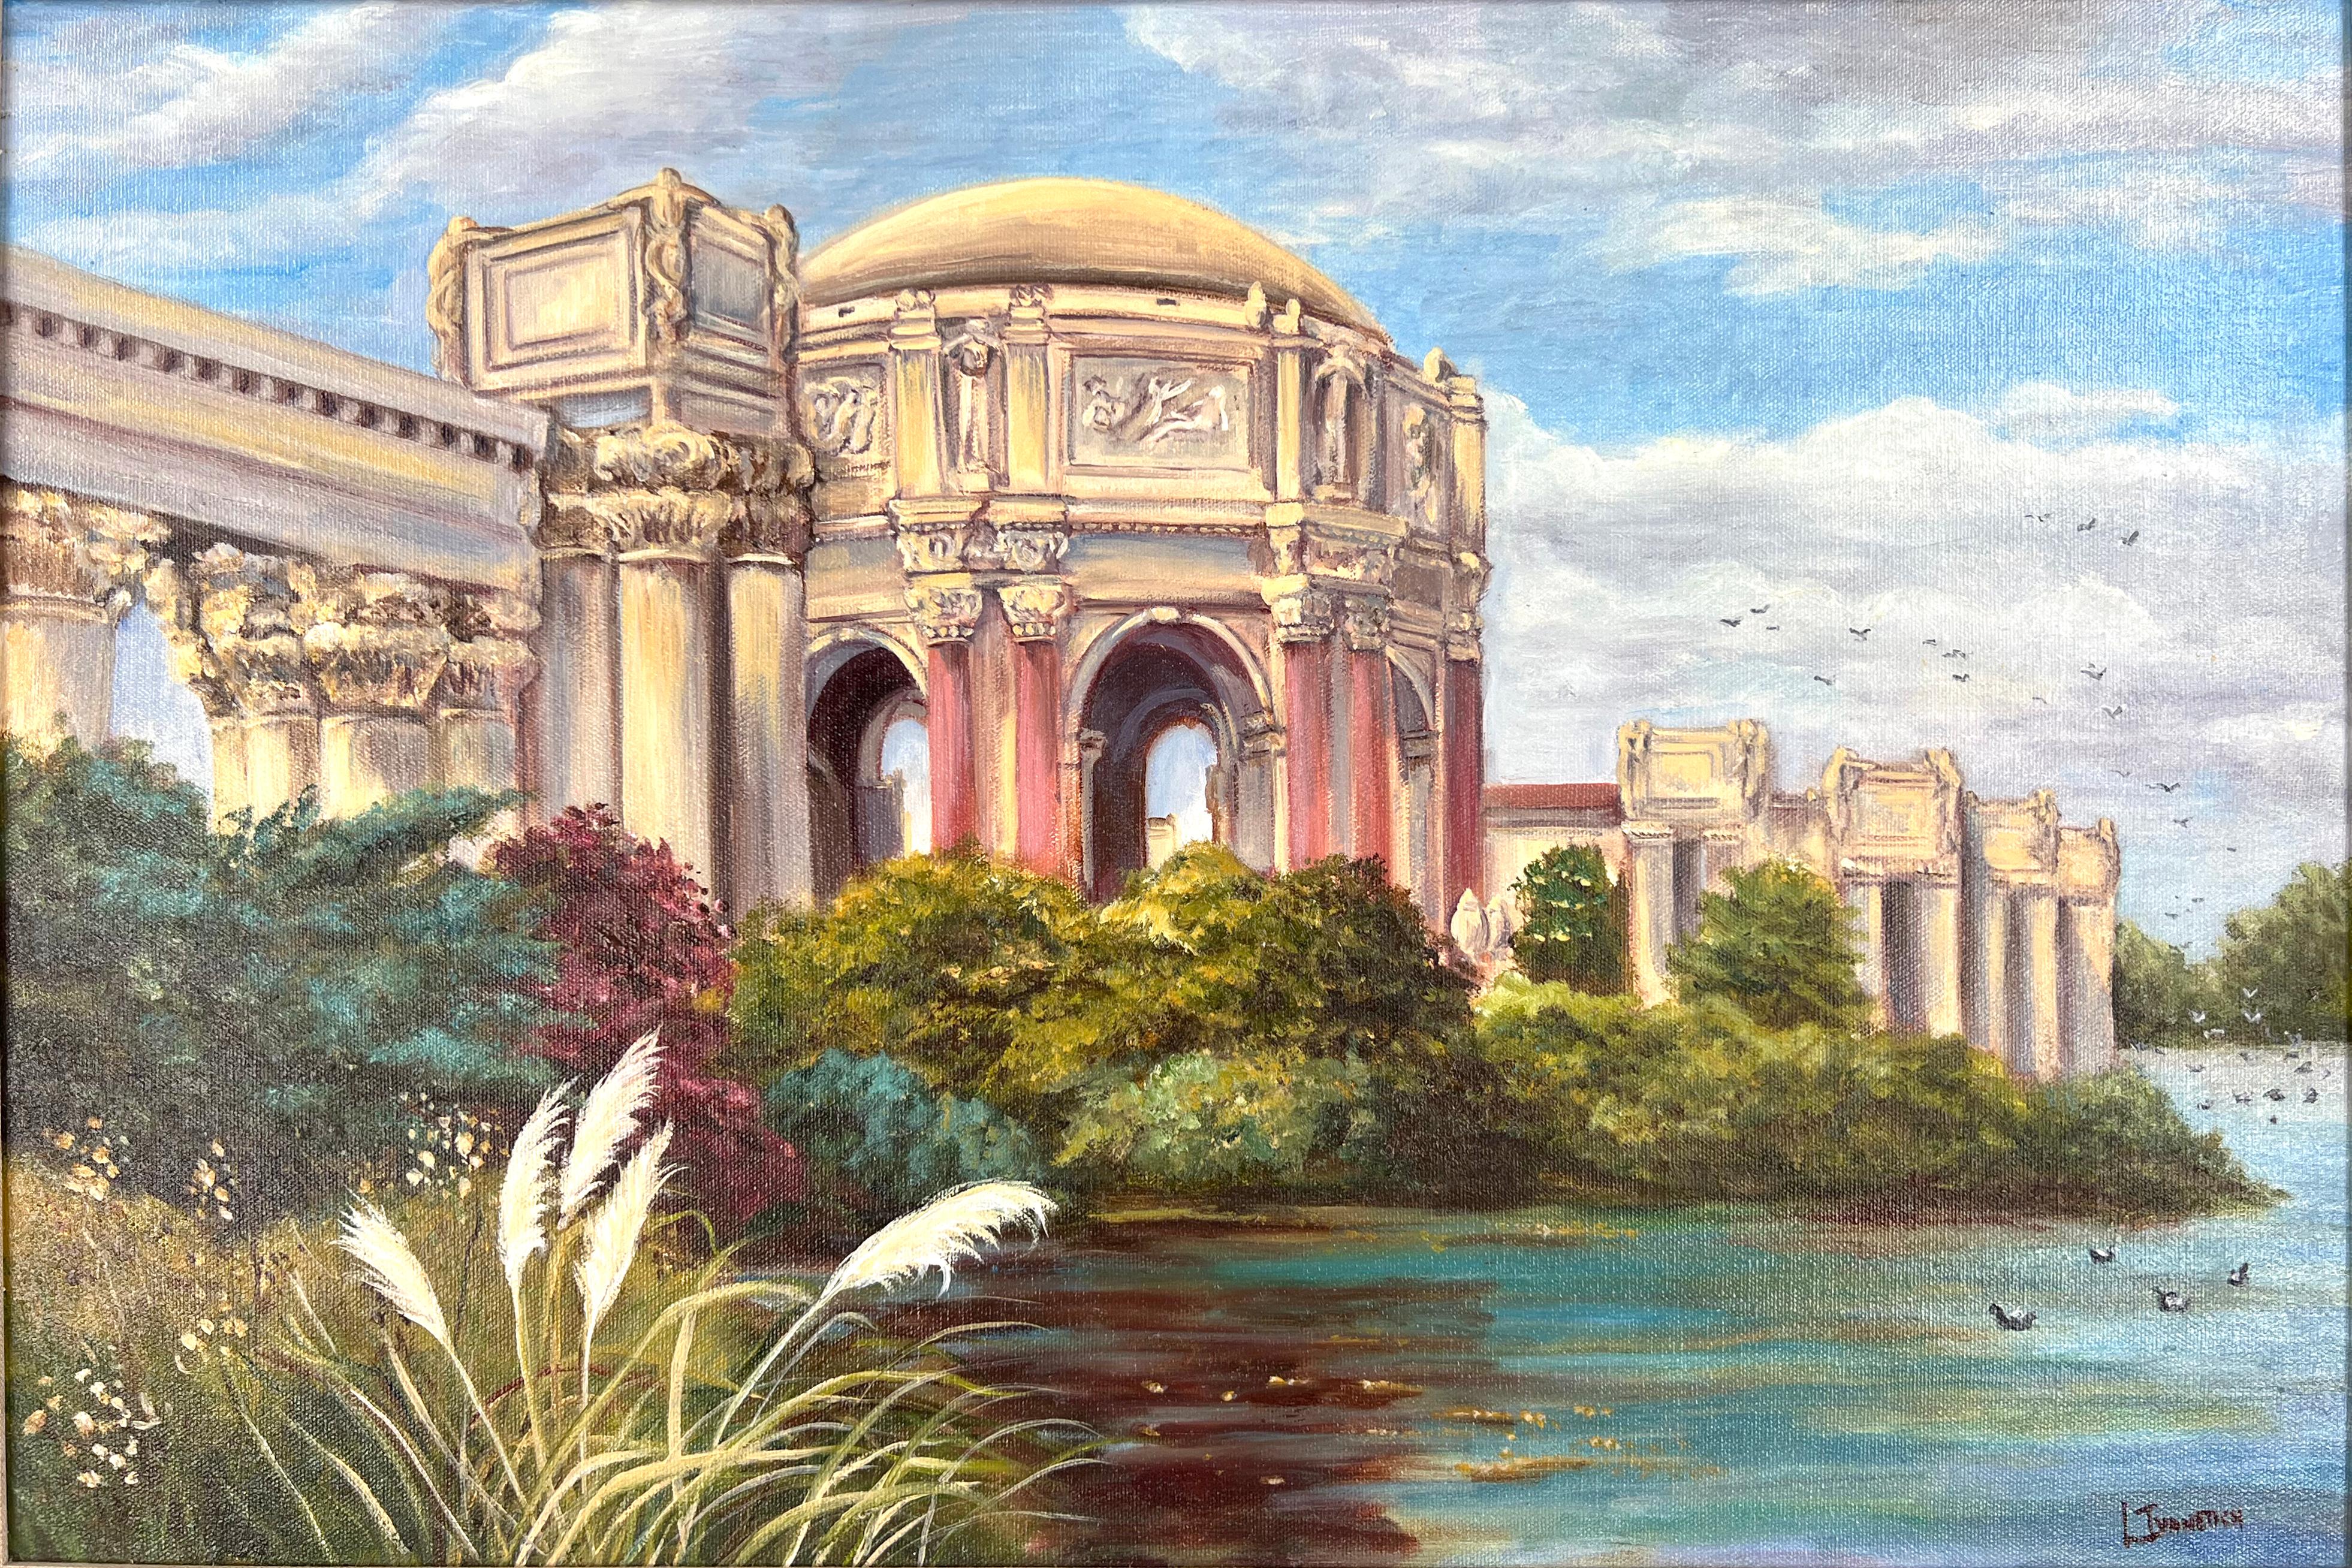 San Francisco Palace of Fine Arts Oil on Canvas - Painting by Leonida Ivanetich